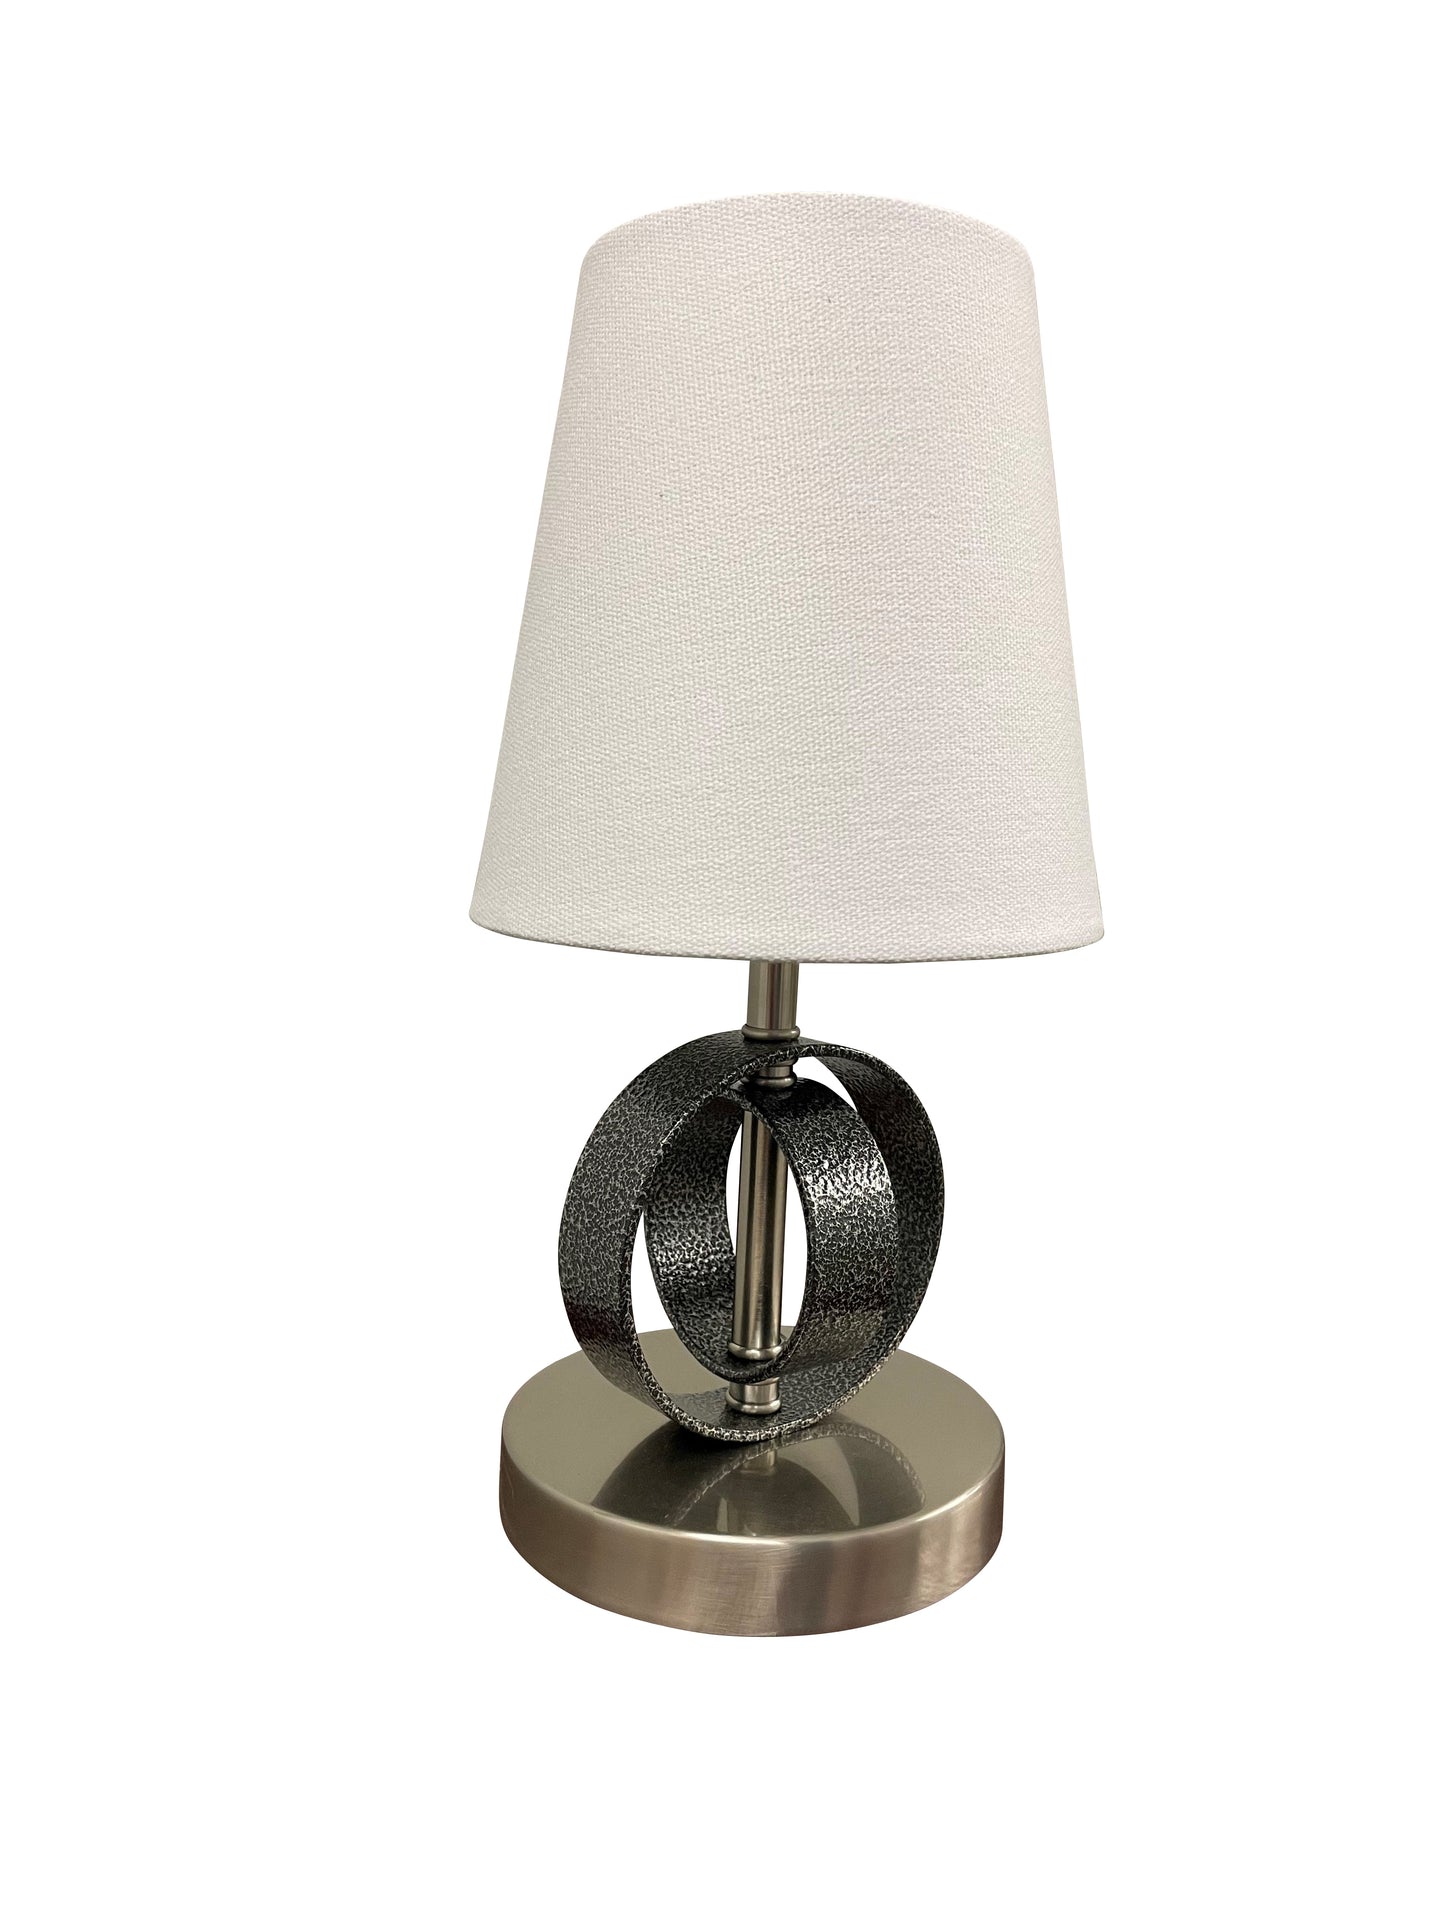 House of Troy Bryson Mini 4" double ring supreme silver/satin nickel accent lamp B209-SS/SN